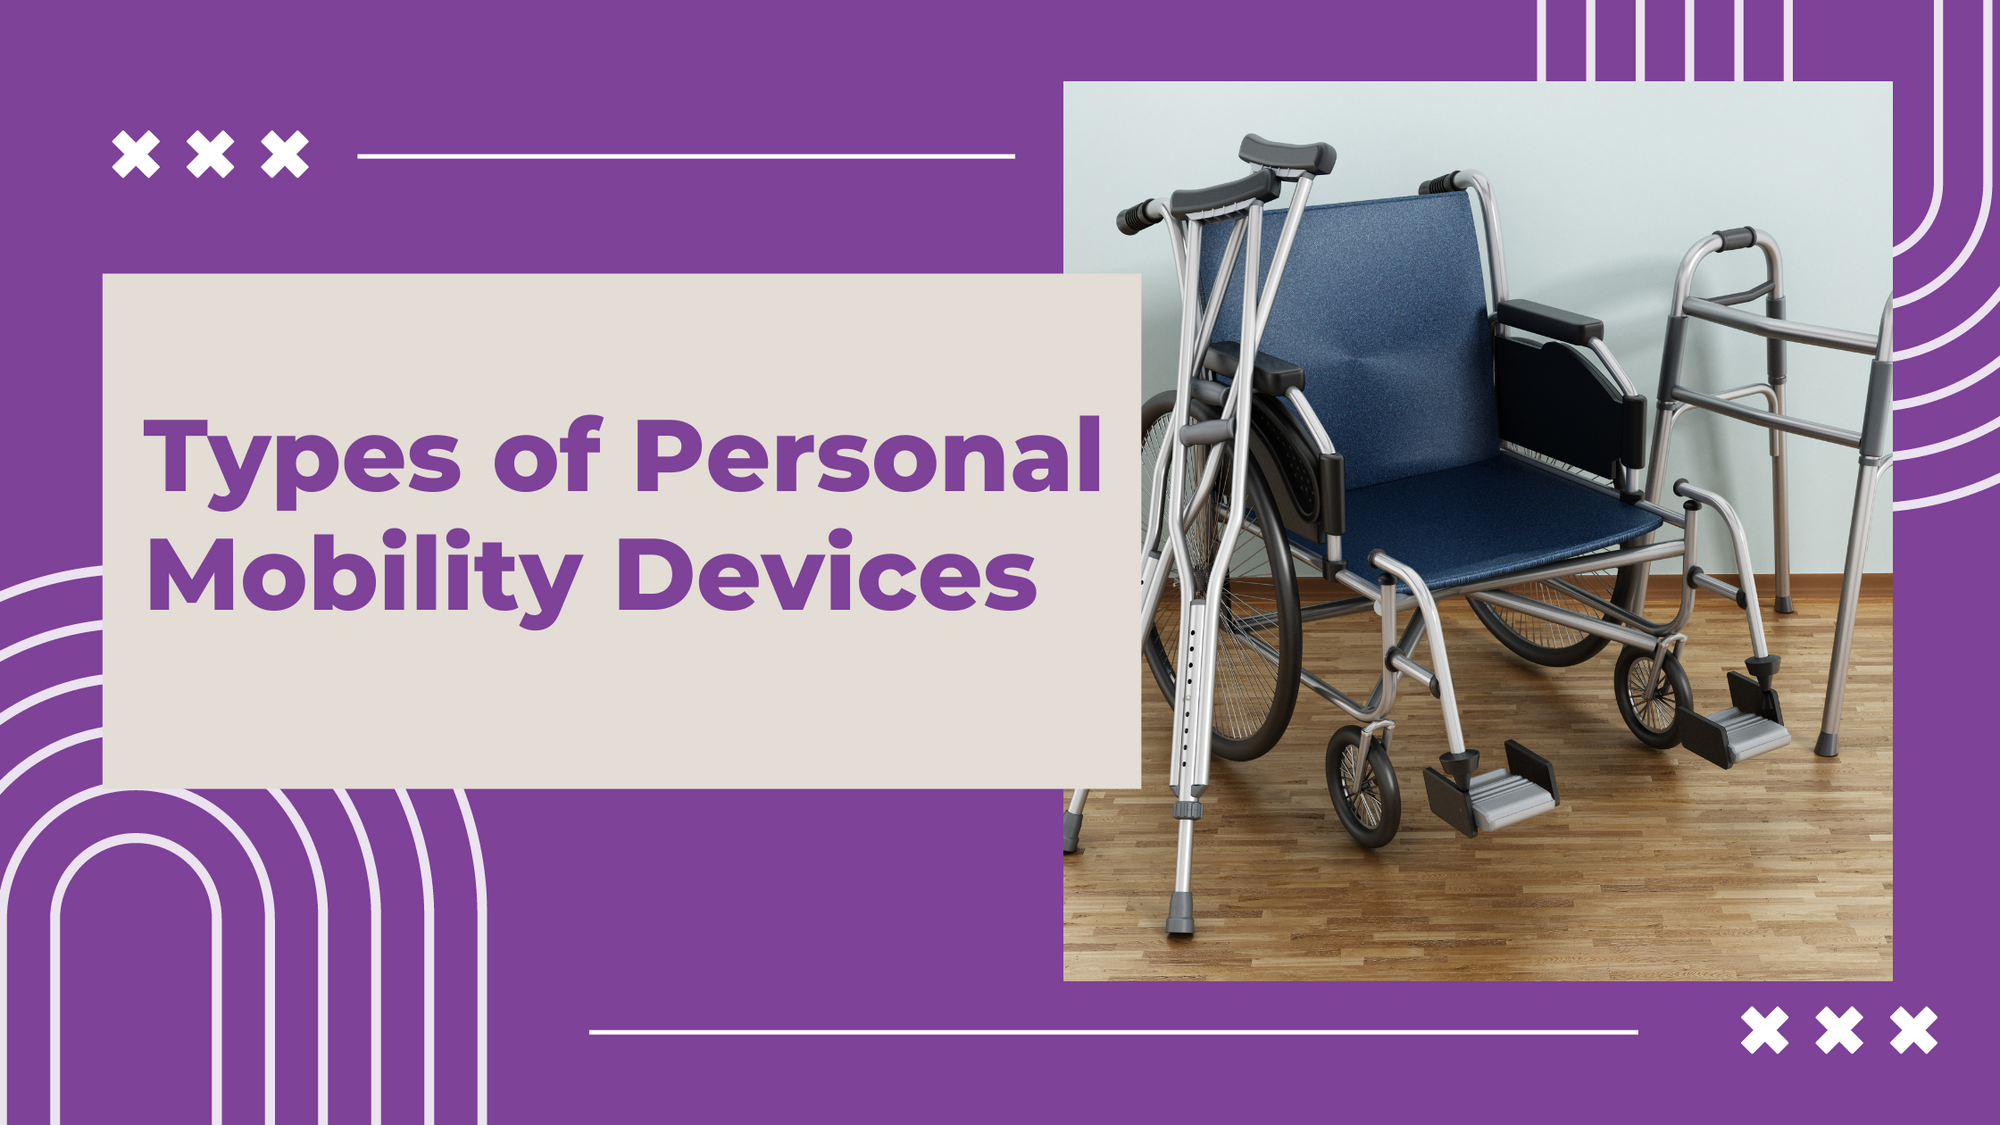 Types of Personal Mobility Support Devices